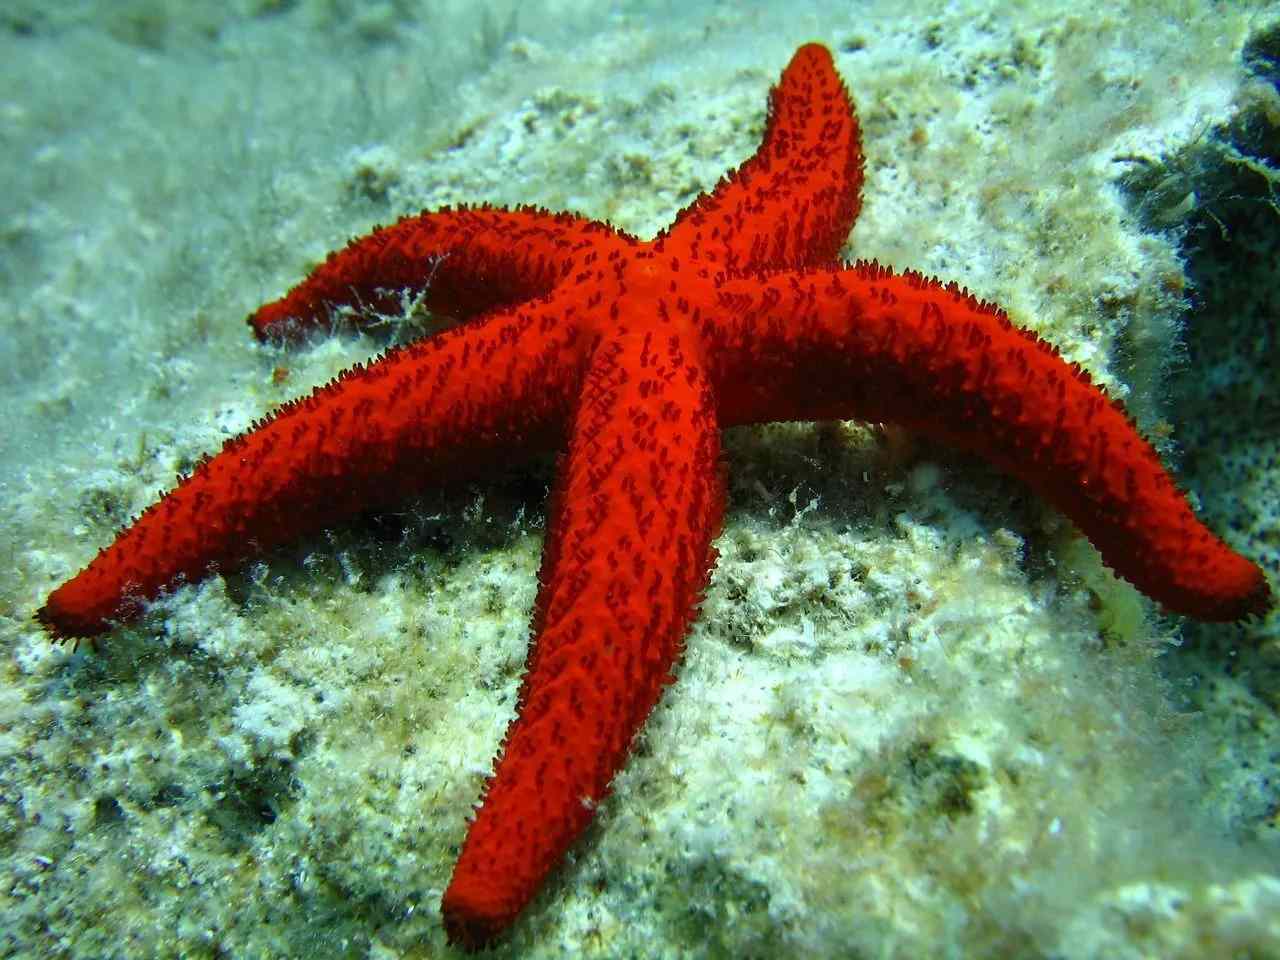 Due to the high number of different species of starfish available